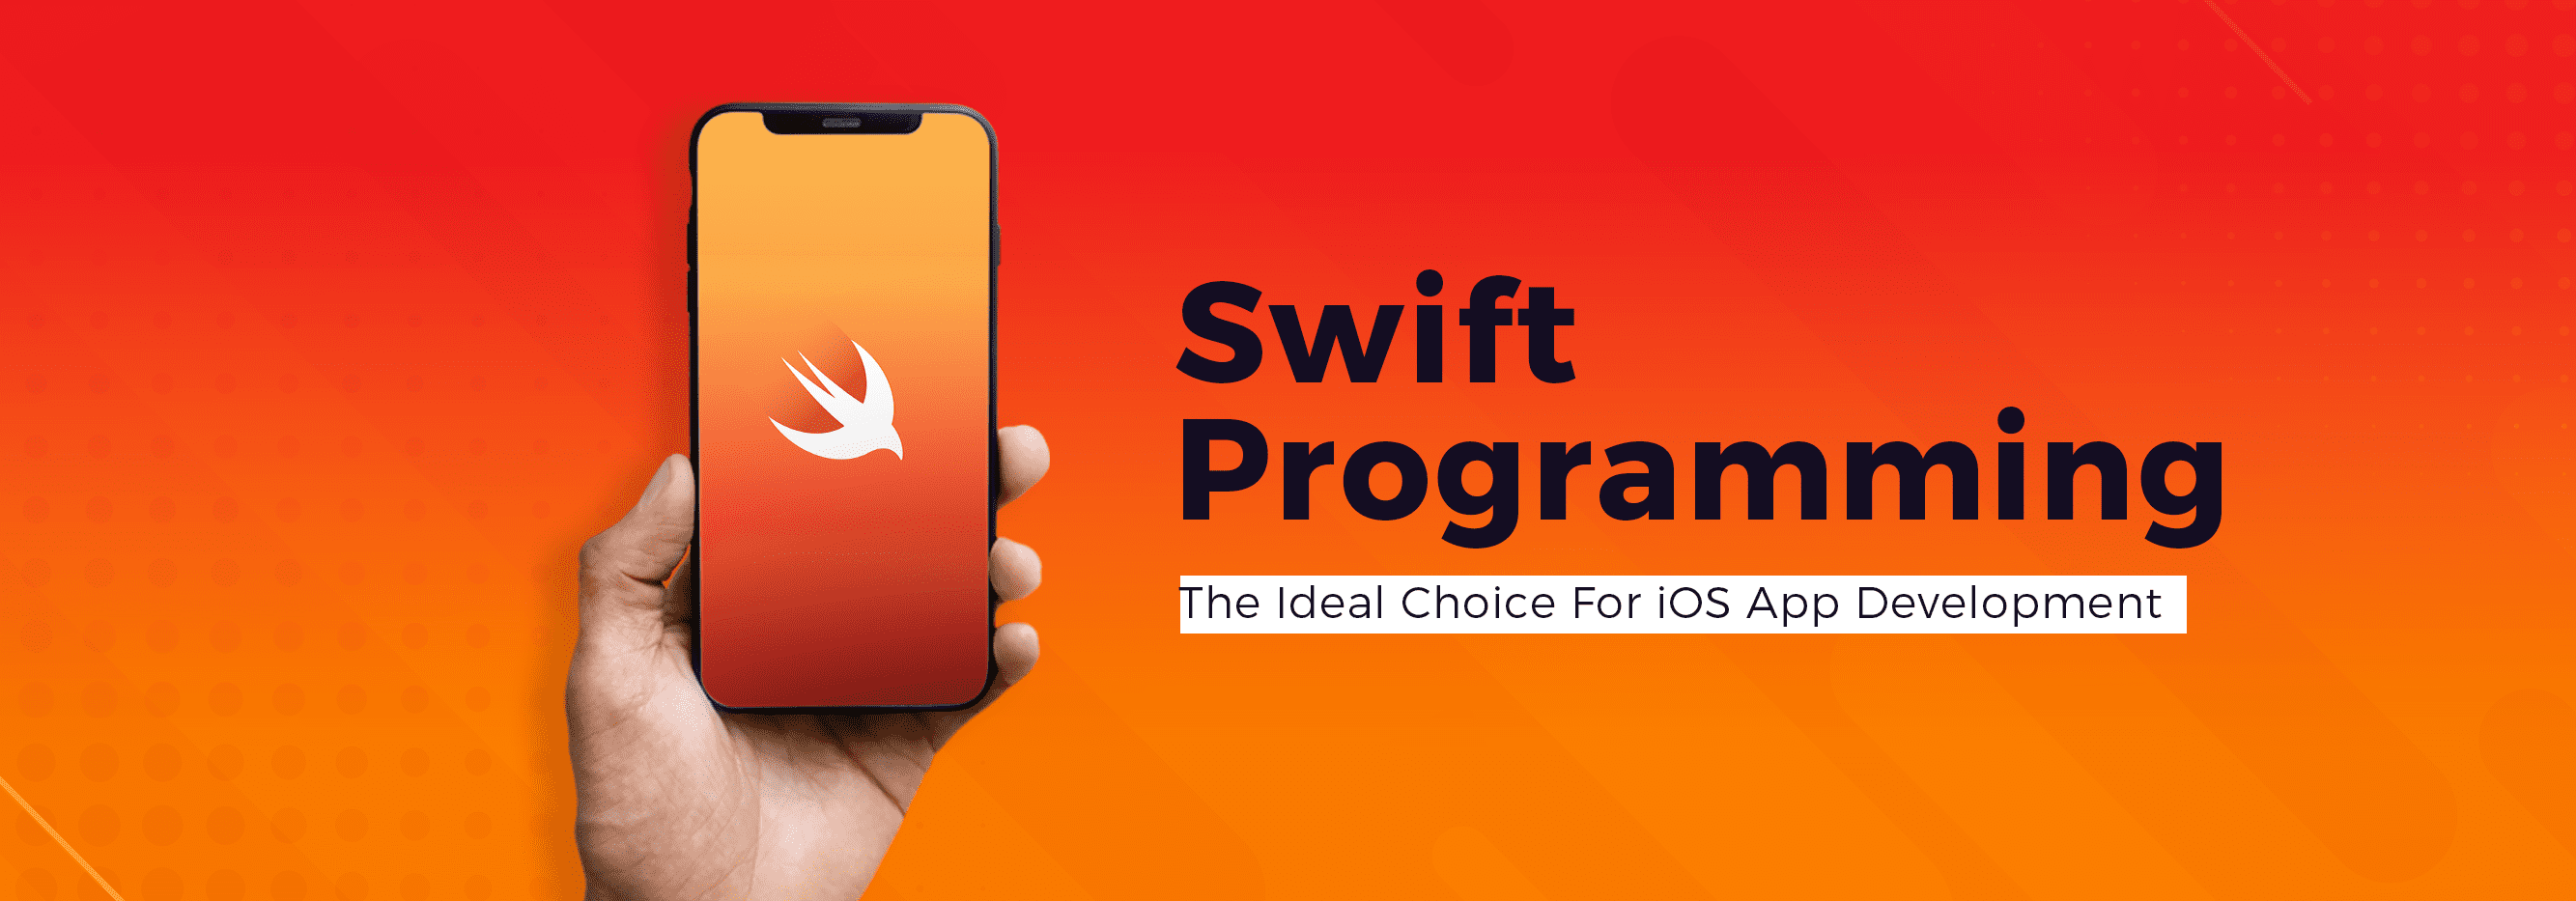 Swift Programming – The Ideal Choice For iOS App Development_banner